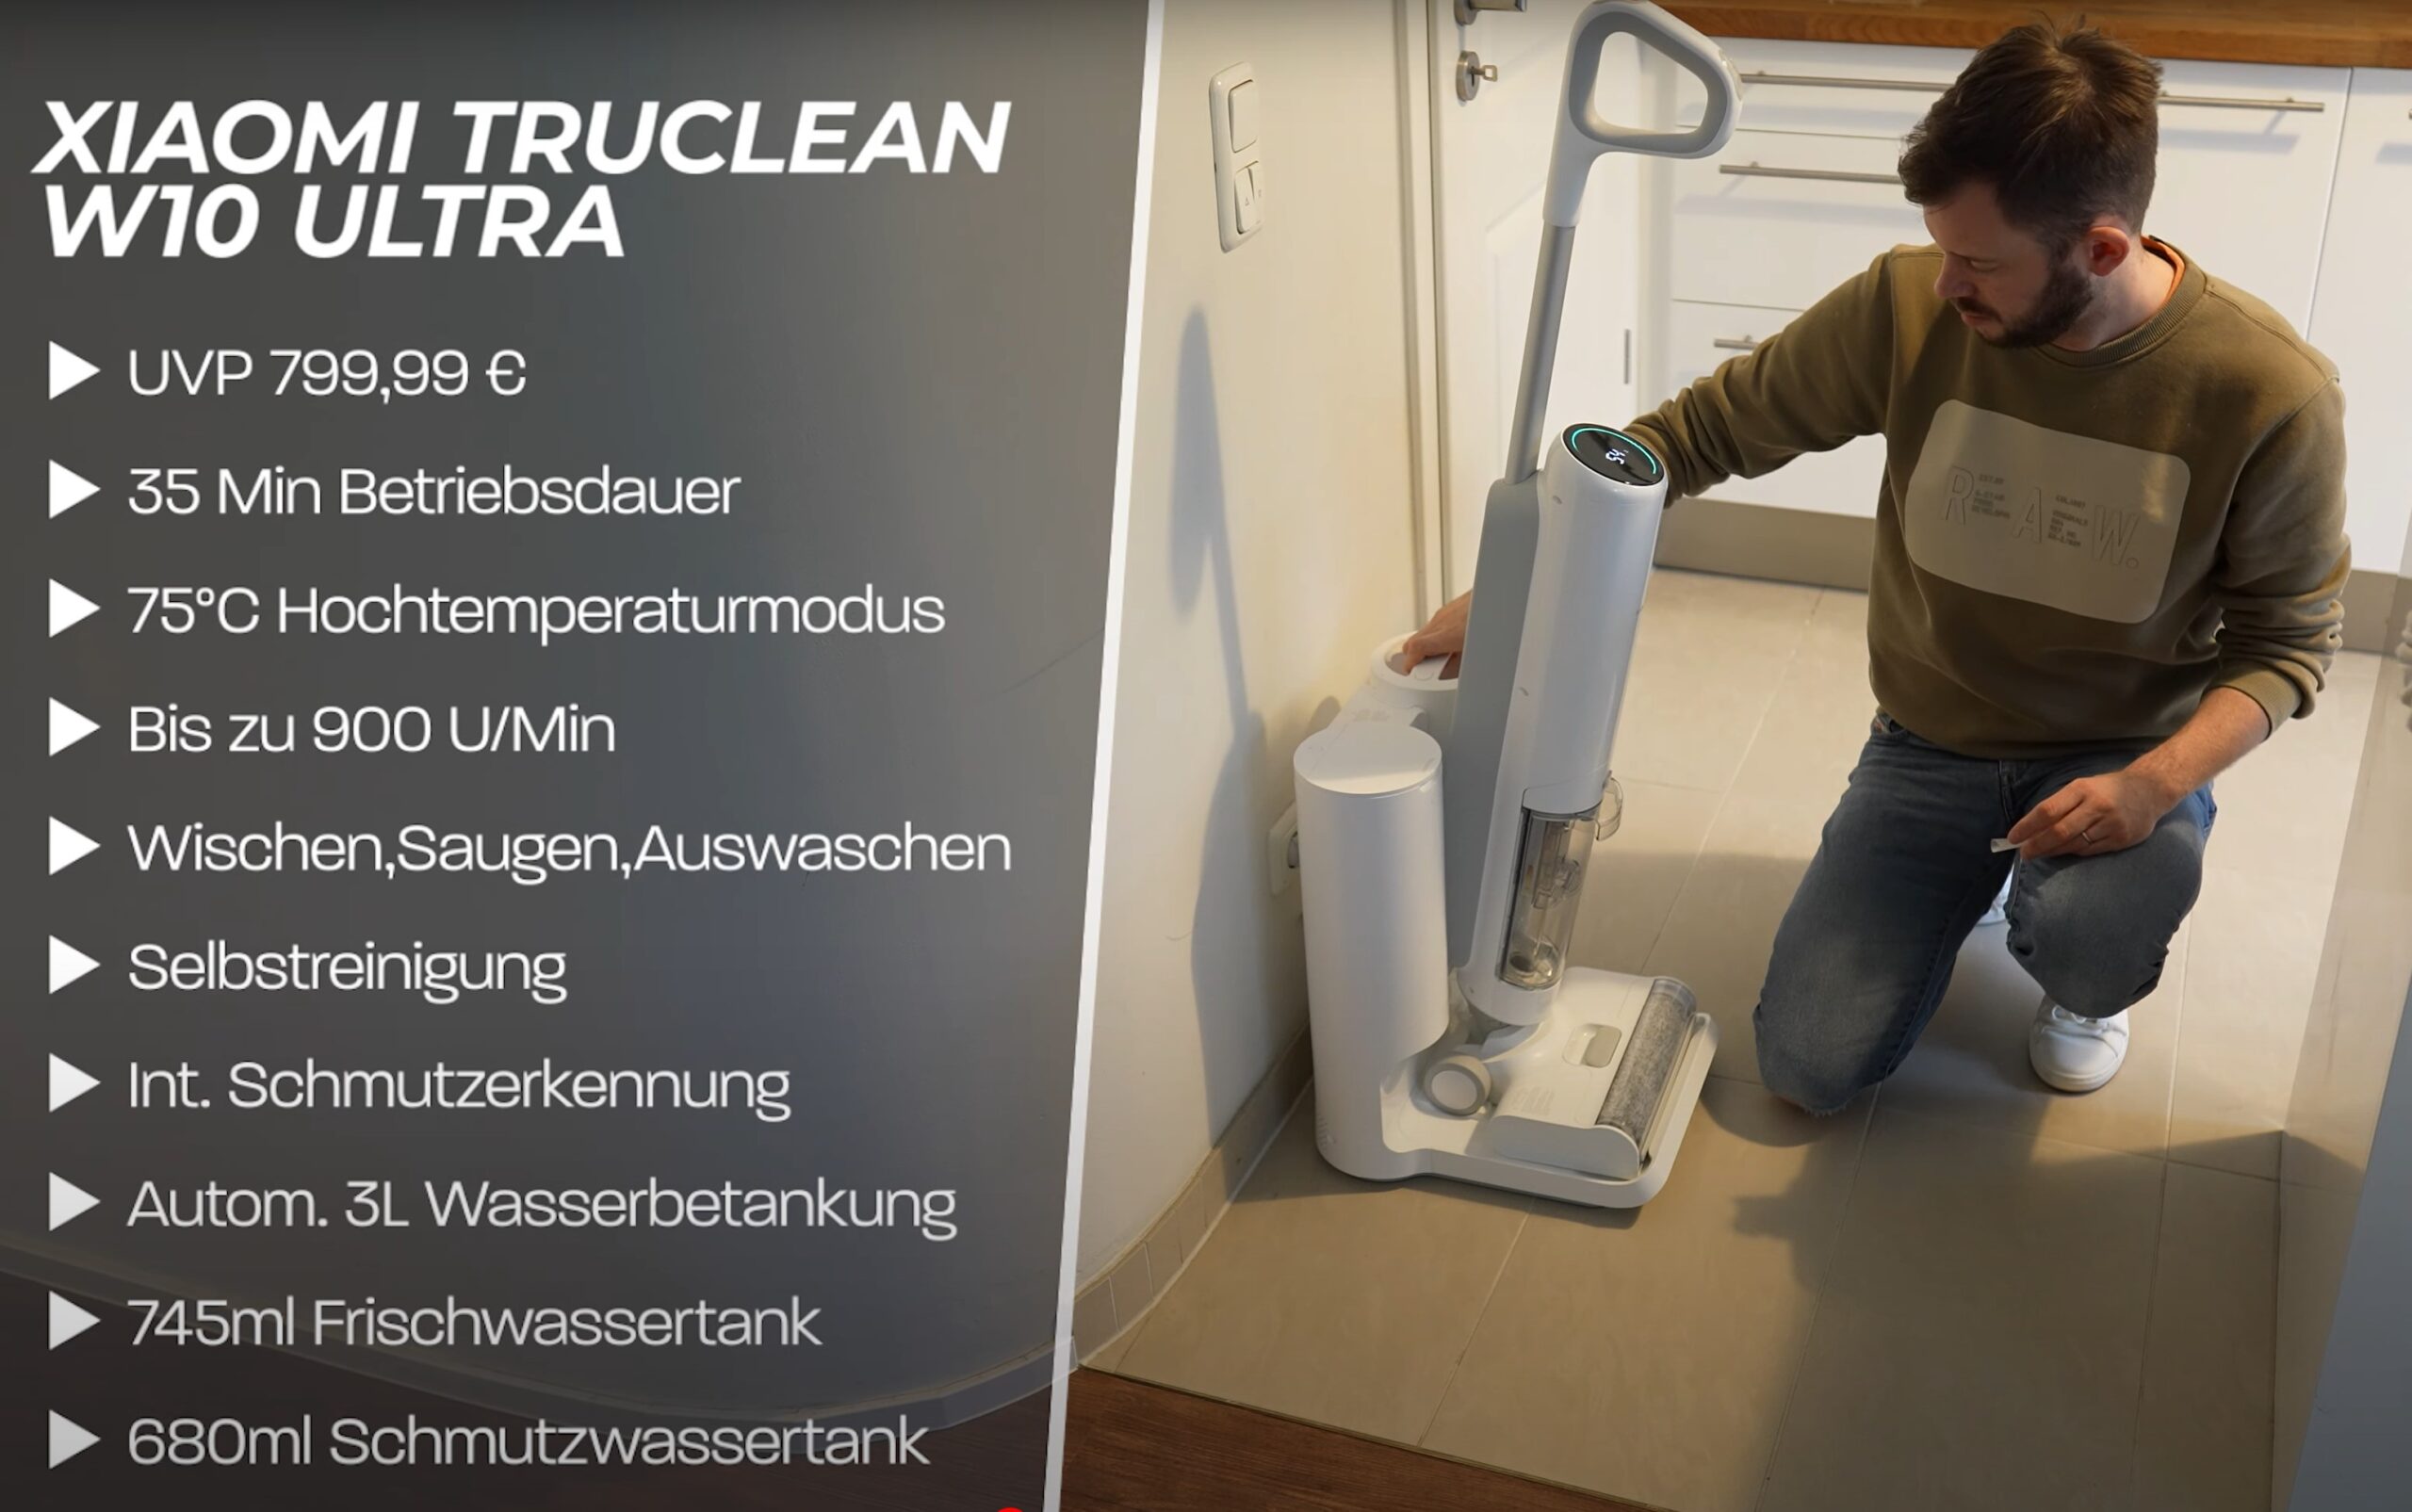 Xiaomi TruClean W10 Ultra mit All-In-One-Station